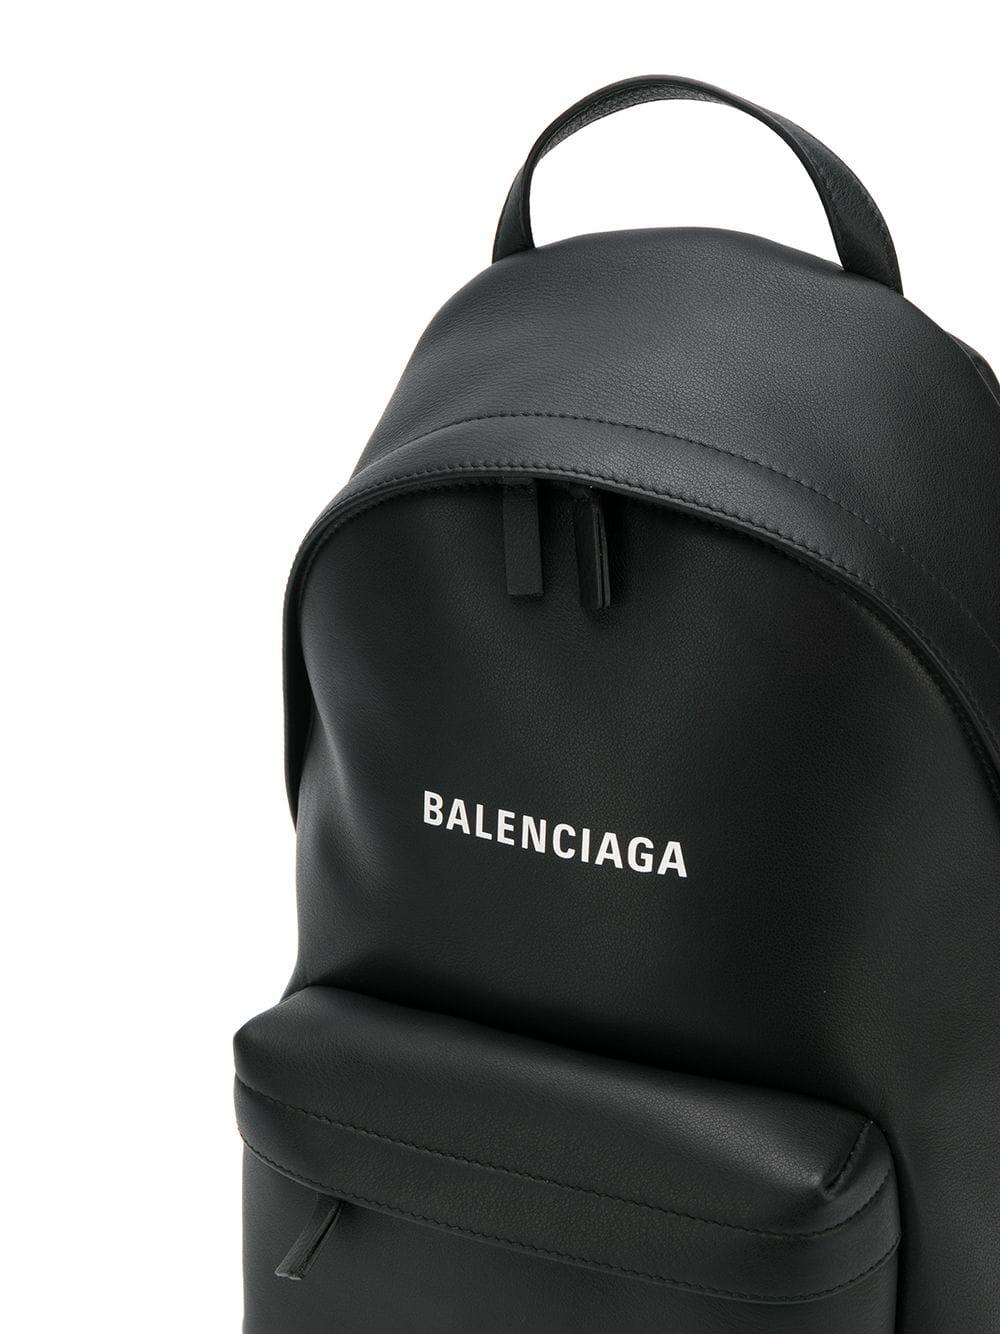 Balenciaga Everyday Backpack Small Leather Black/white | Lyst